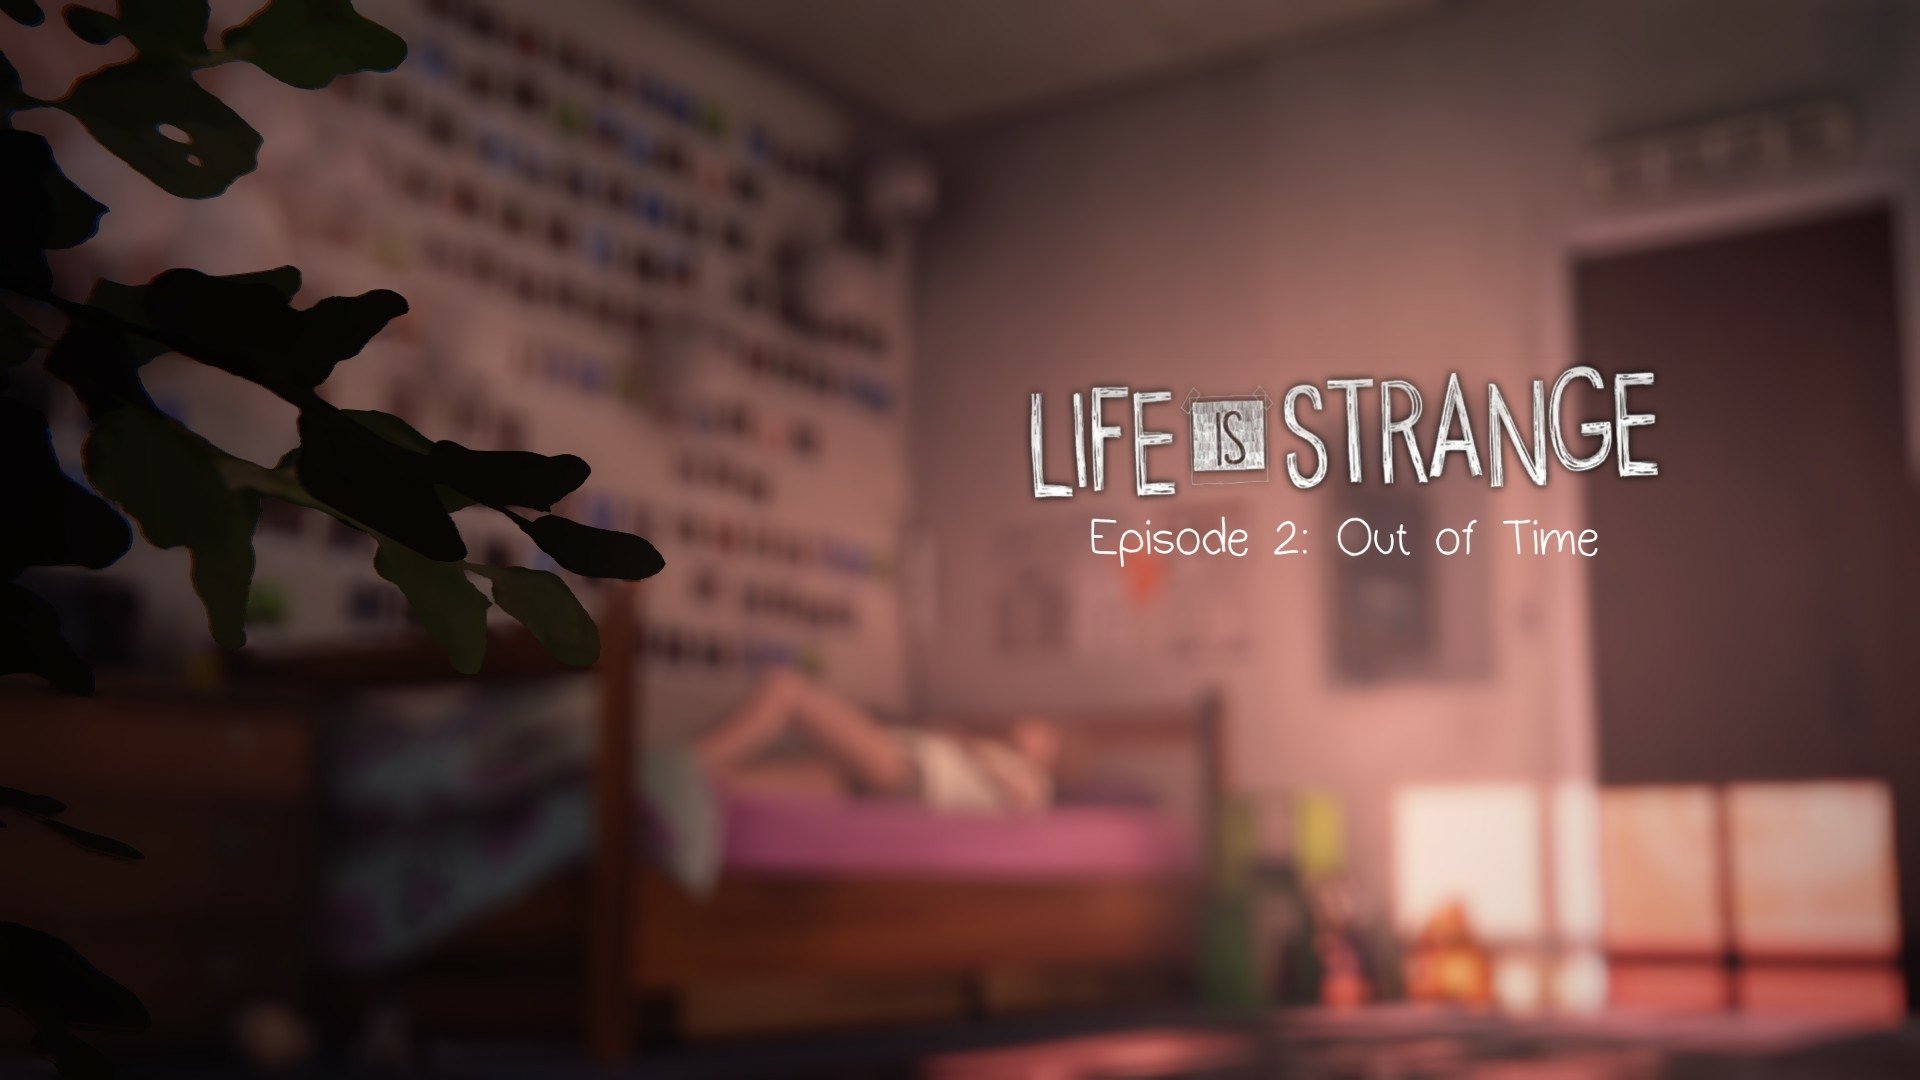 Life is life год. Life is Strange эпизоды. Life is Strange 1 эпизод. Life is Strange 2 1 эпизод. Life is Strange Episode 2 out of time.